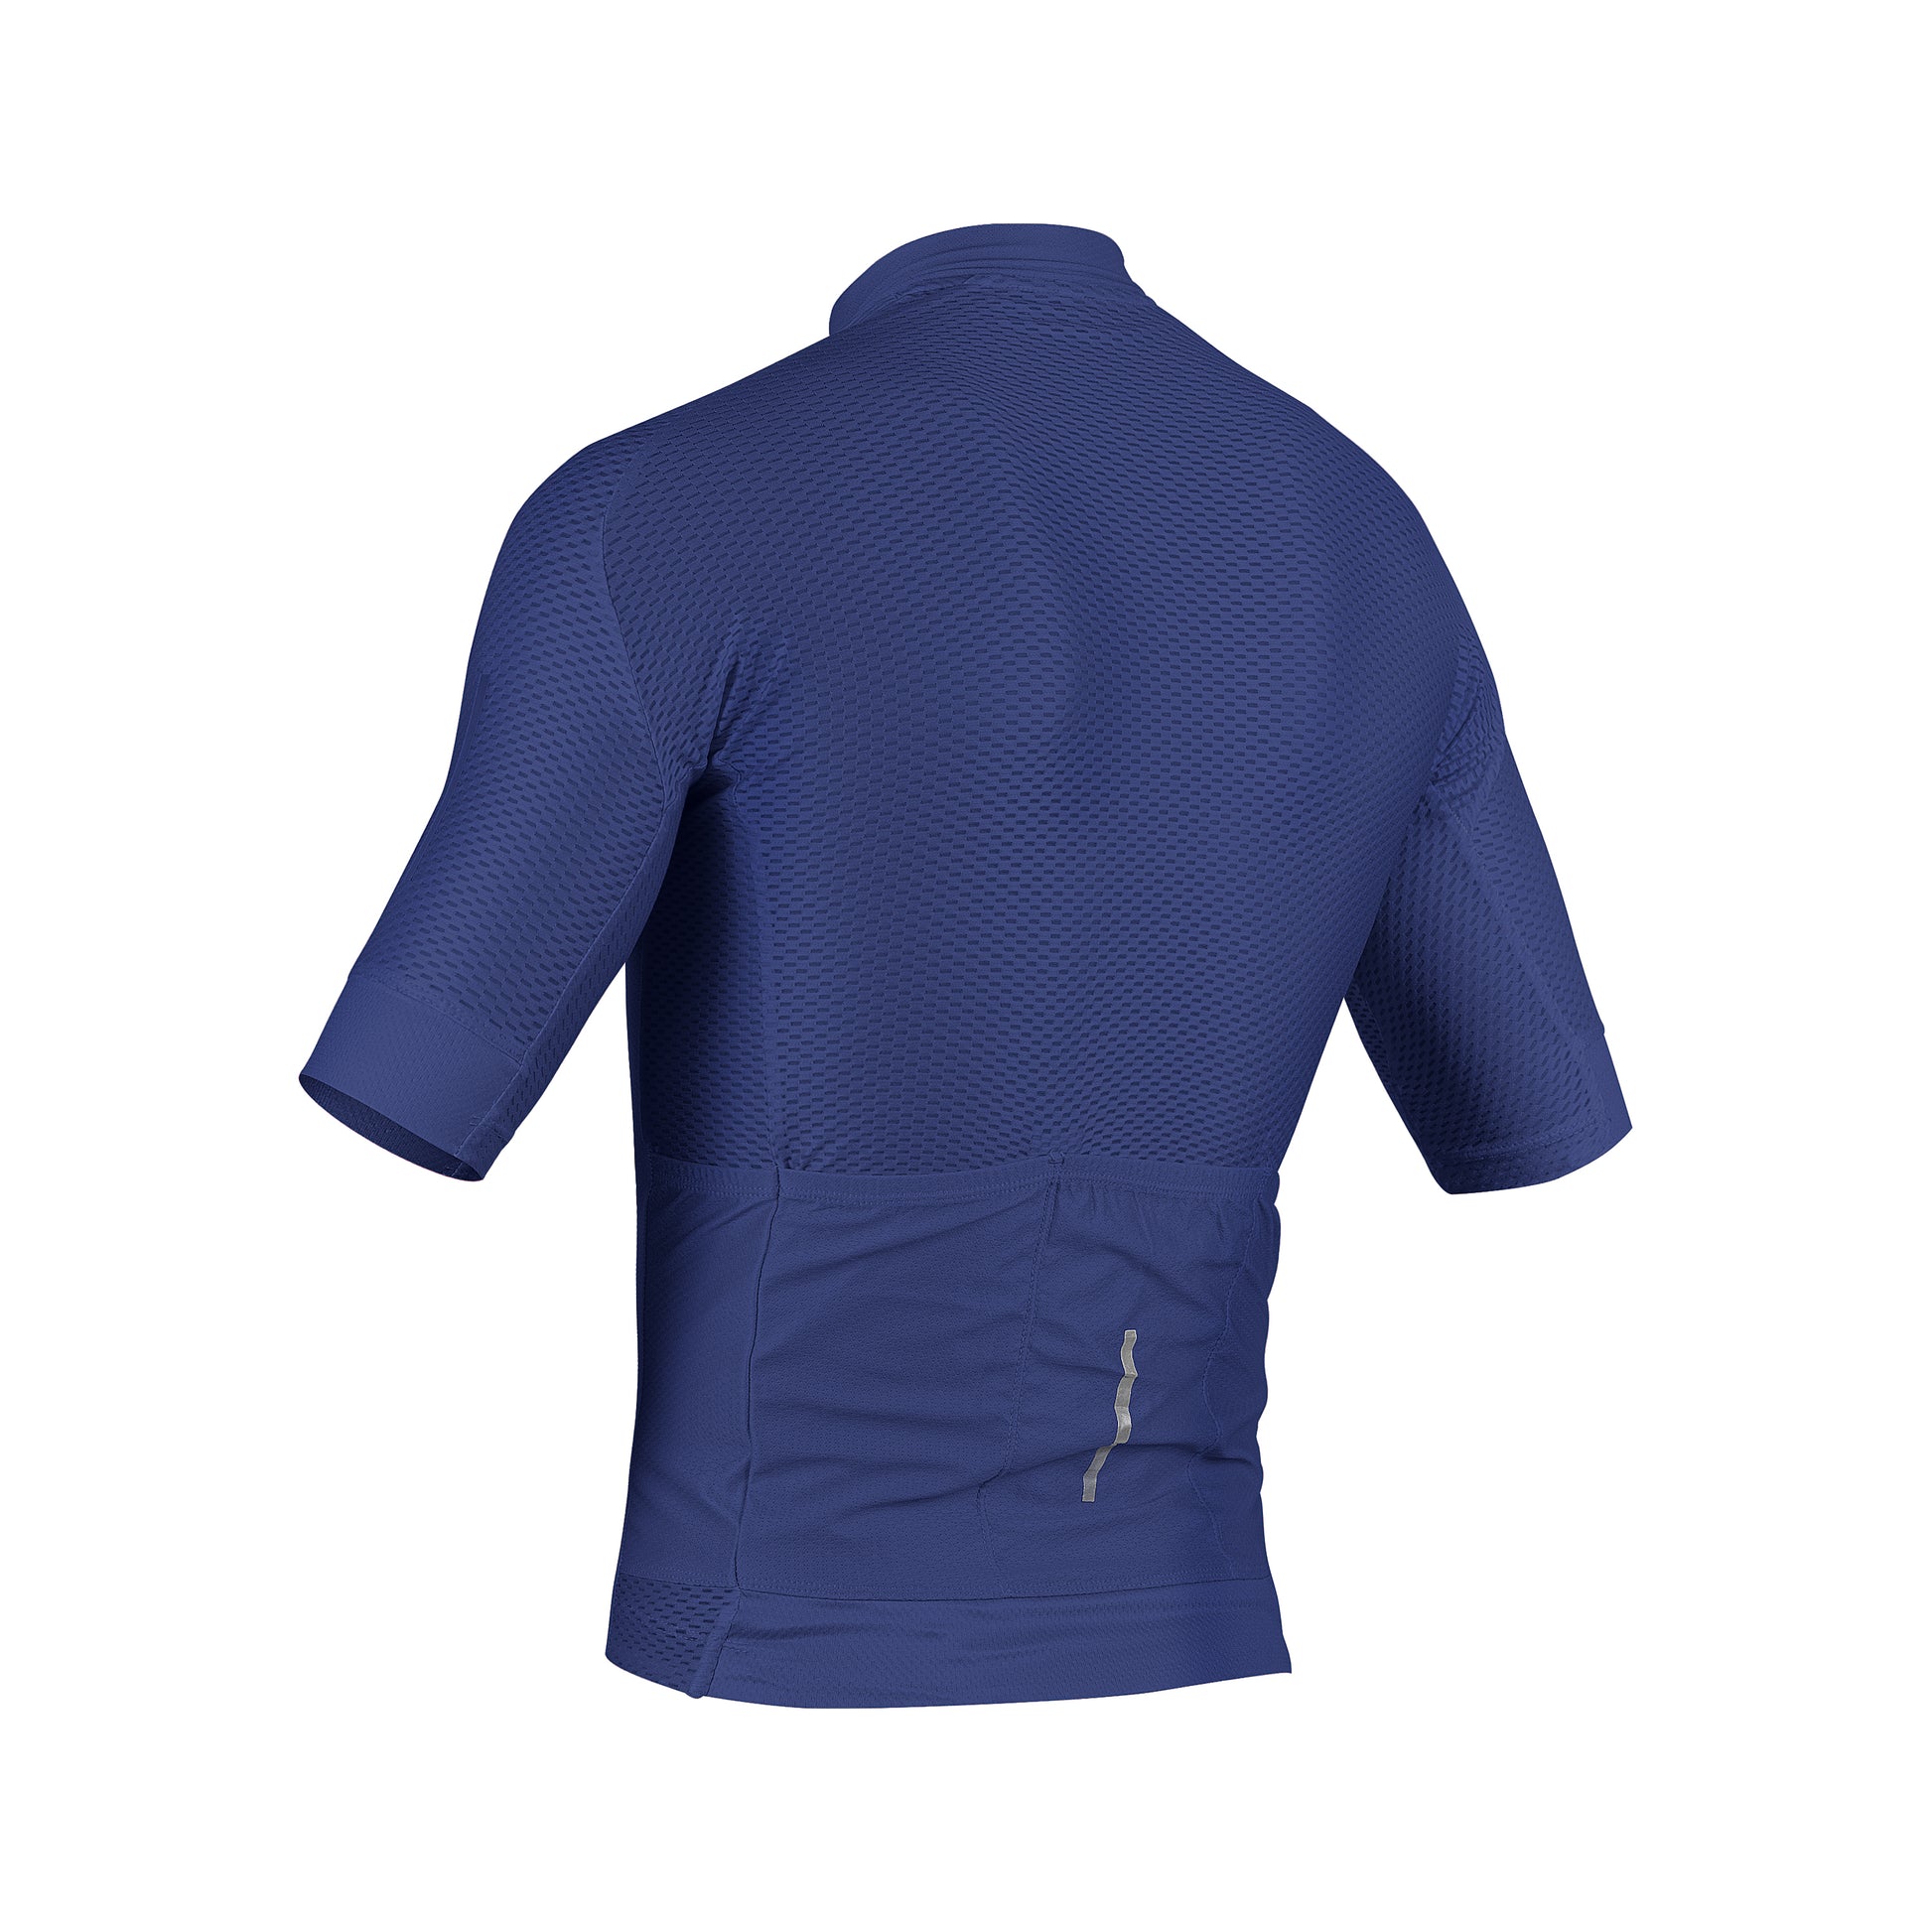 Zol Cycling Blue Breathable Race Fit Jersey (Men's) - Zol Cycling